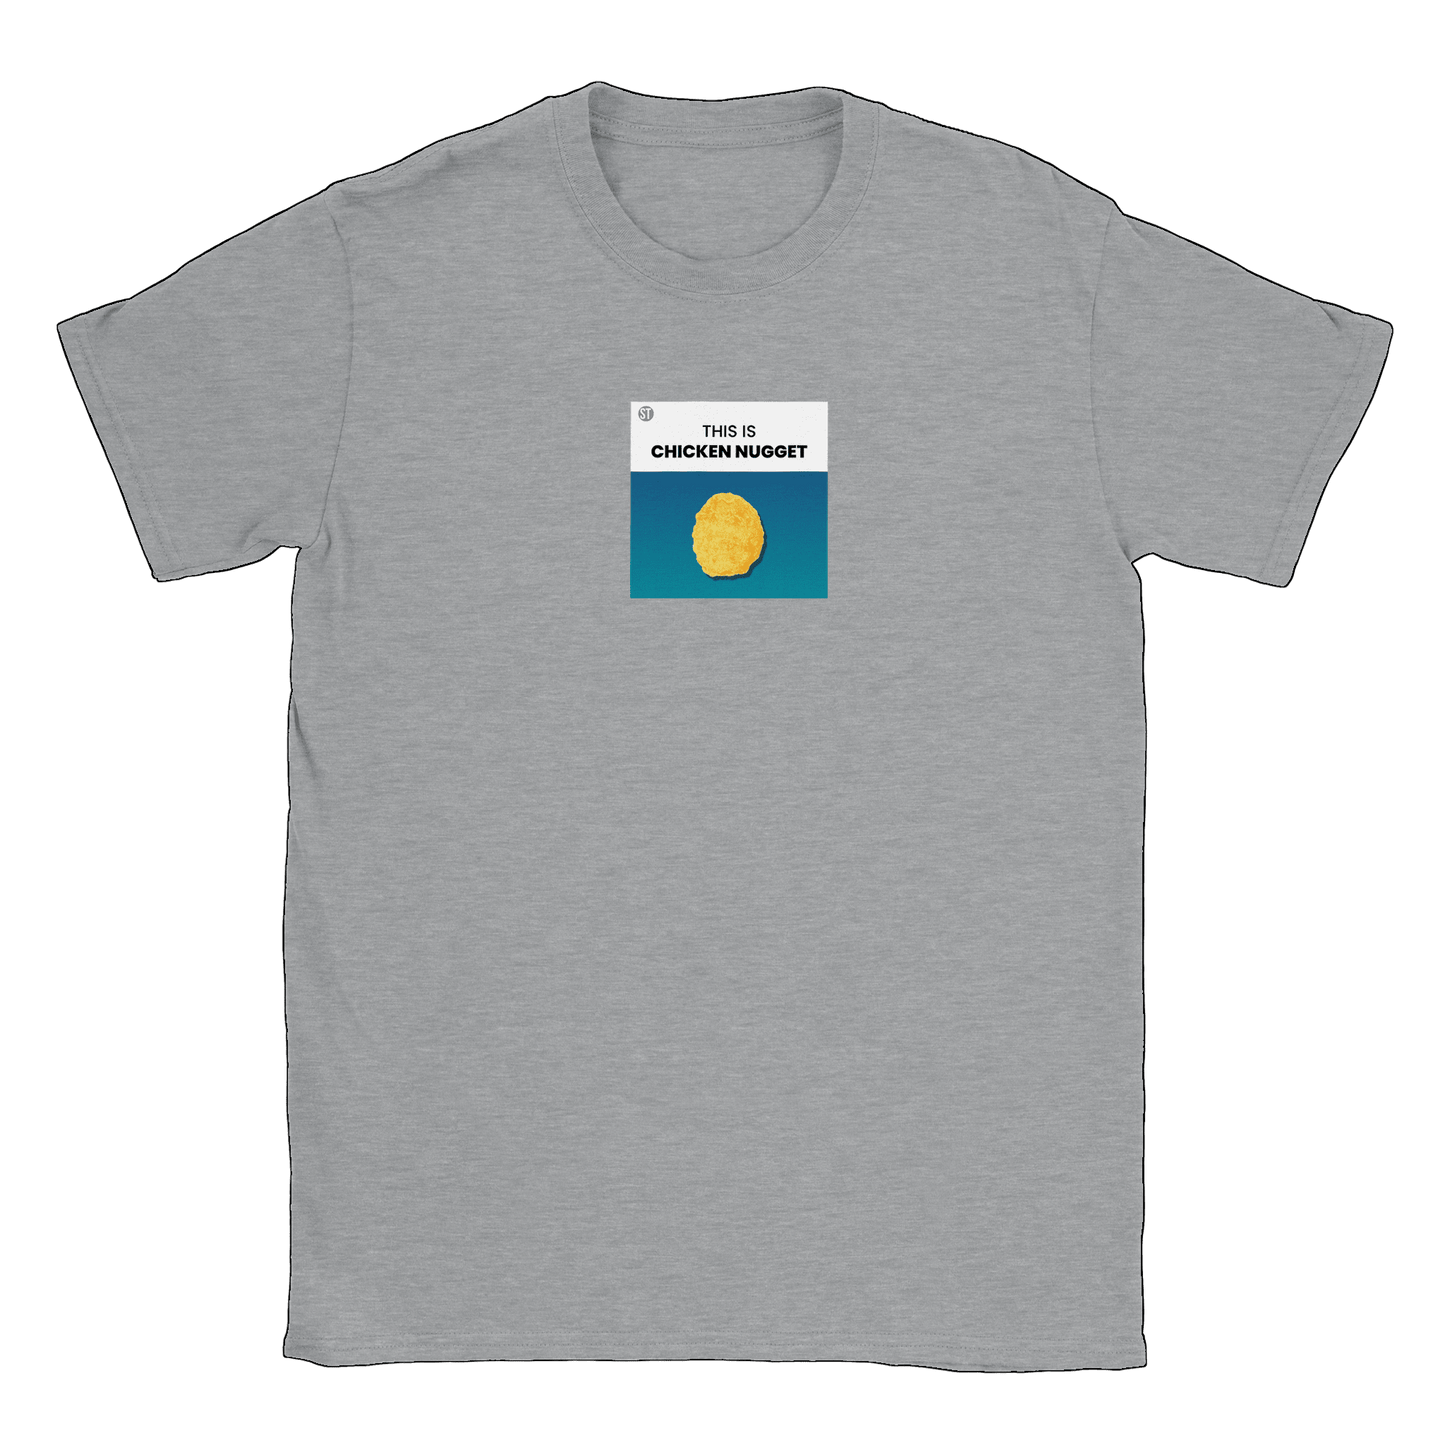 This is Chicken Nugget - T-shirt Sports Grey